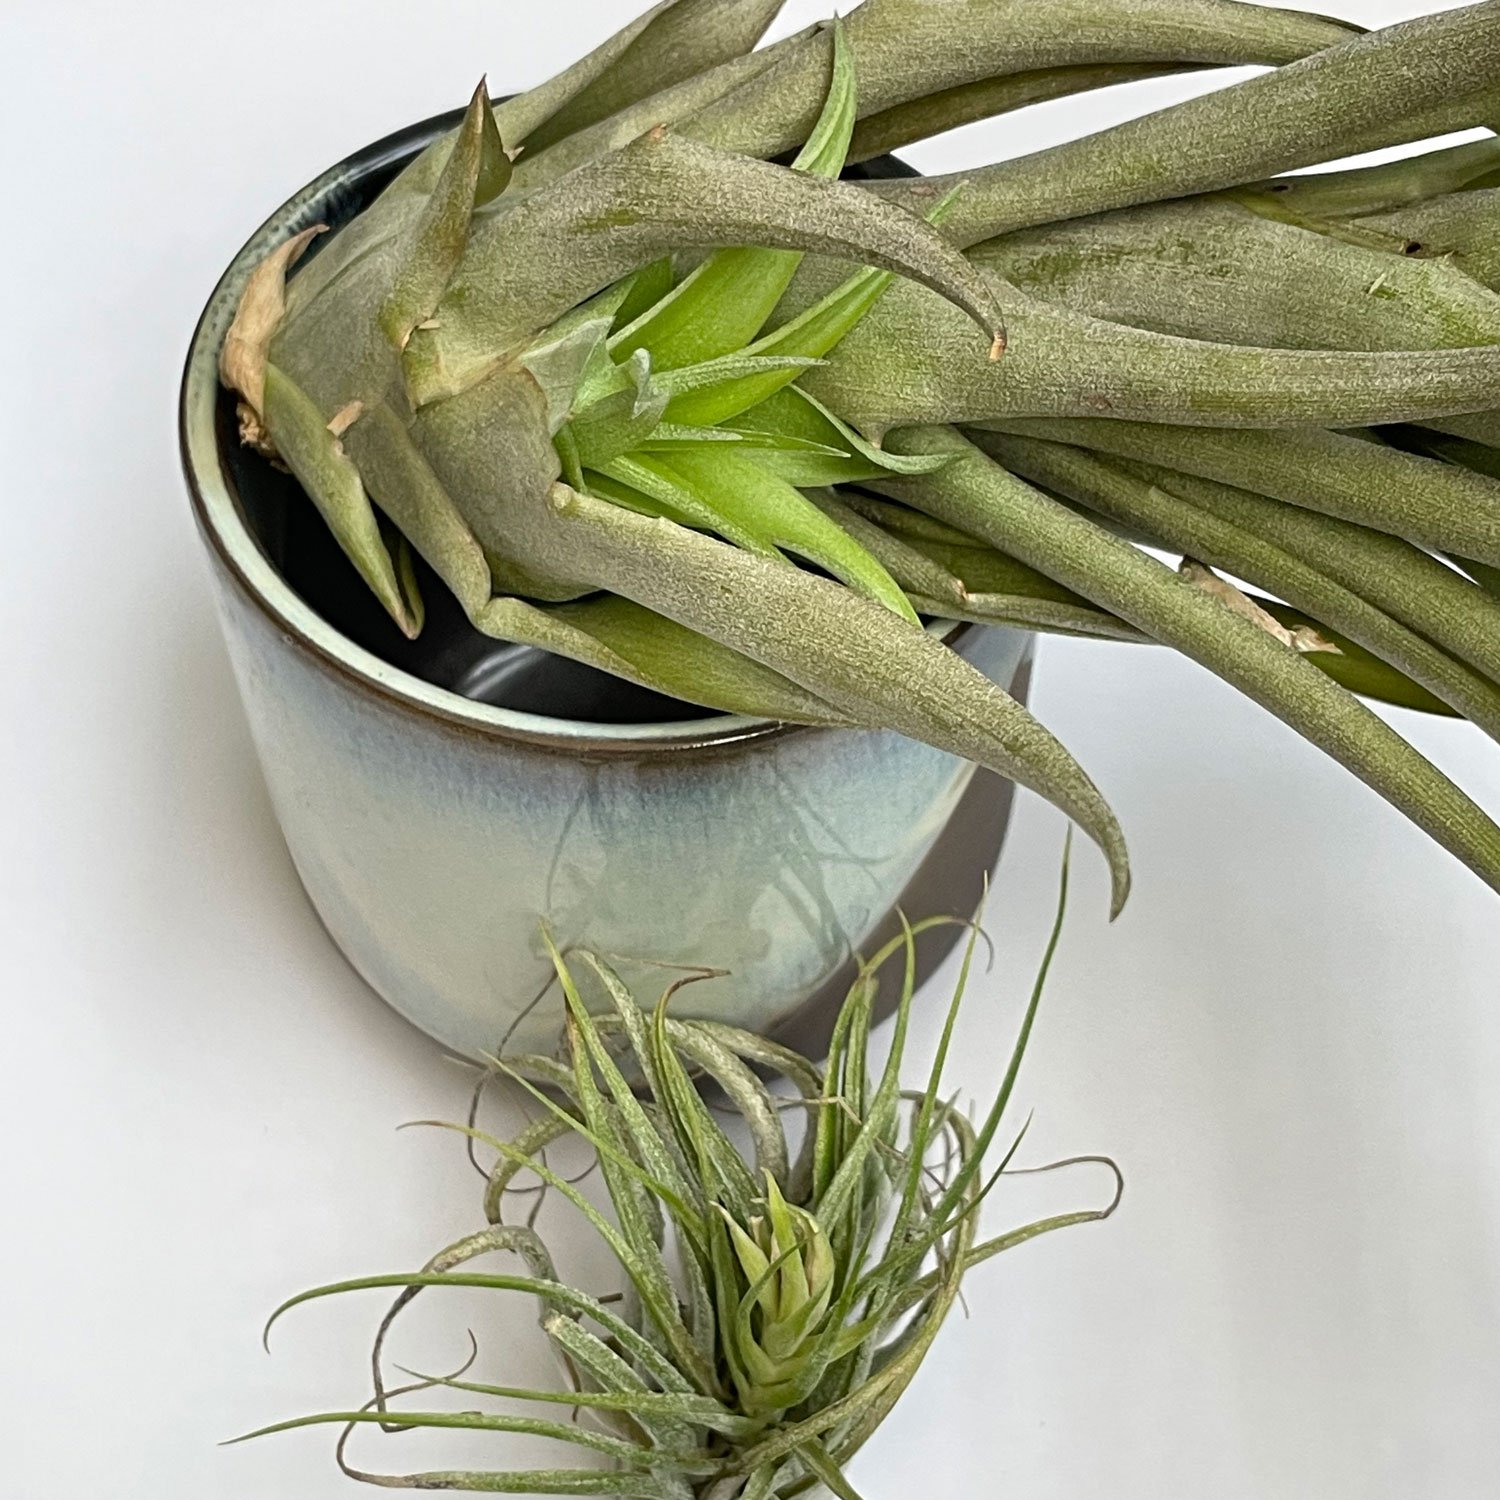 Air plant pups look brighter green